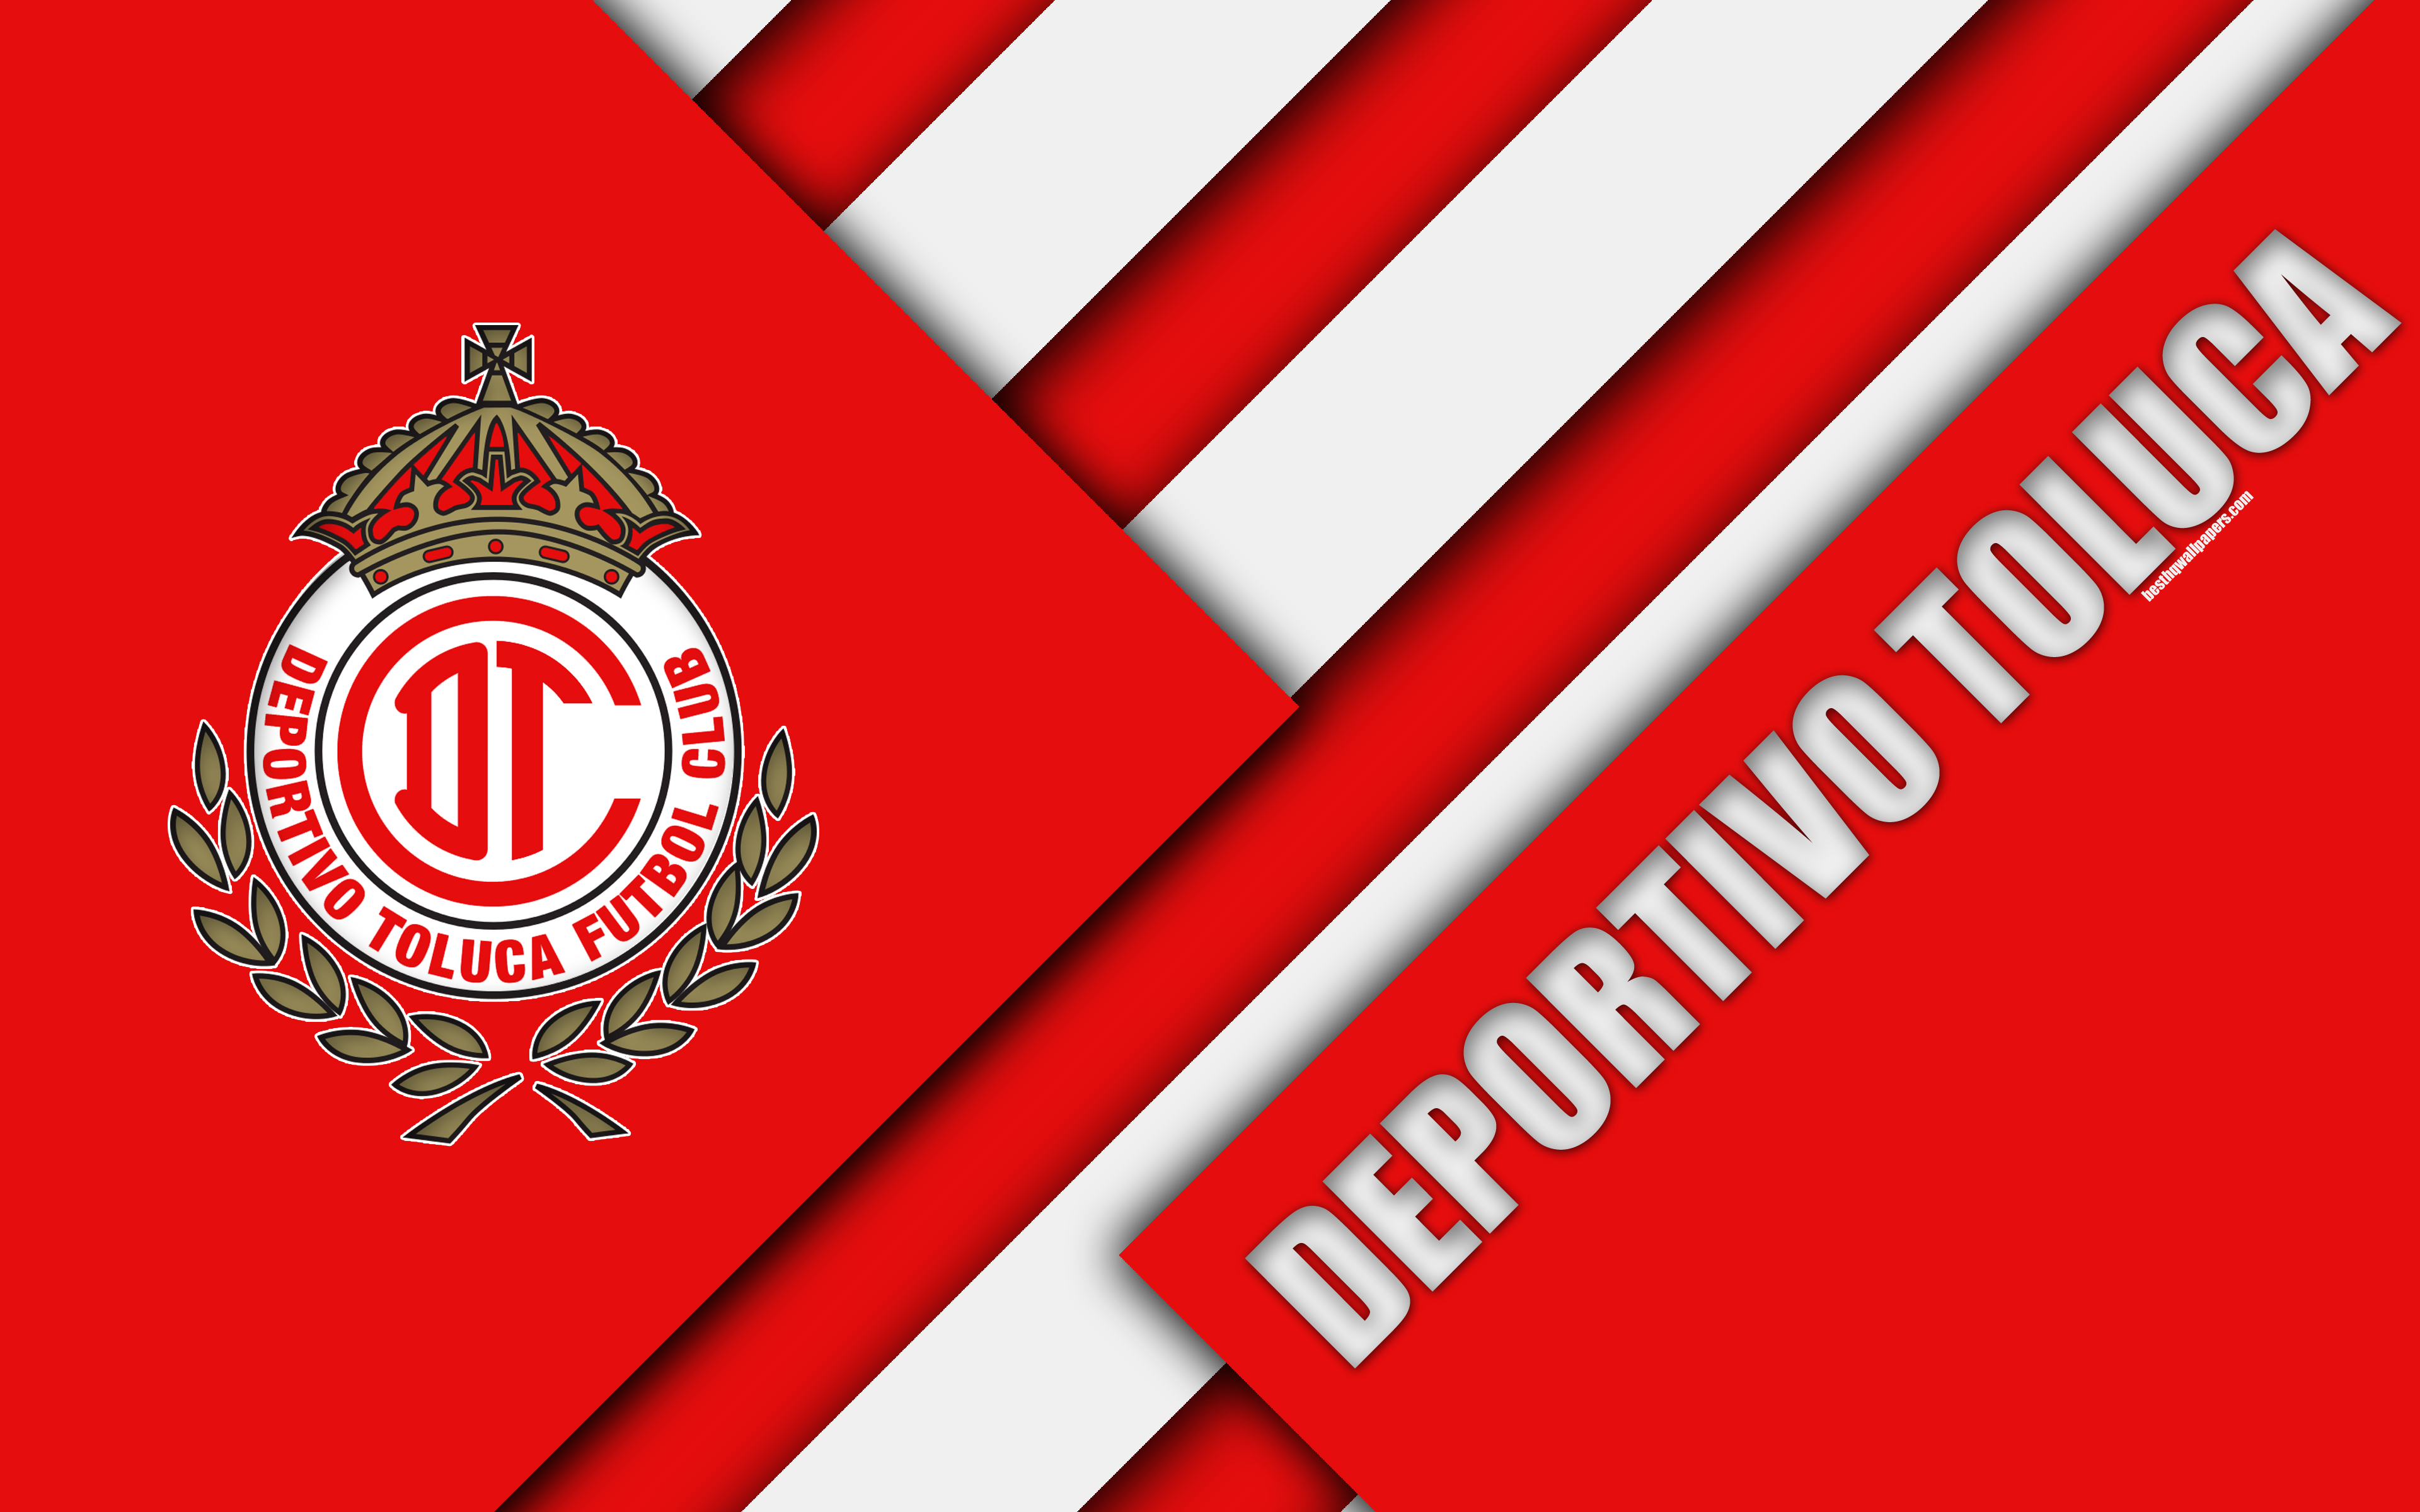 Download wallpaper Deportivo Toluca FC, 4k, Mexican Football Club, material design, logo, red white abstraction, Toluca de Lerdo, Mexico, Primera Division, Liga MX for desktop with resolution 3840x2400. High Quality HD picture